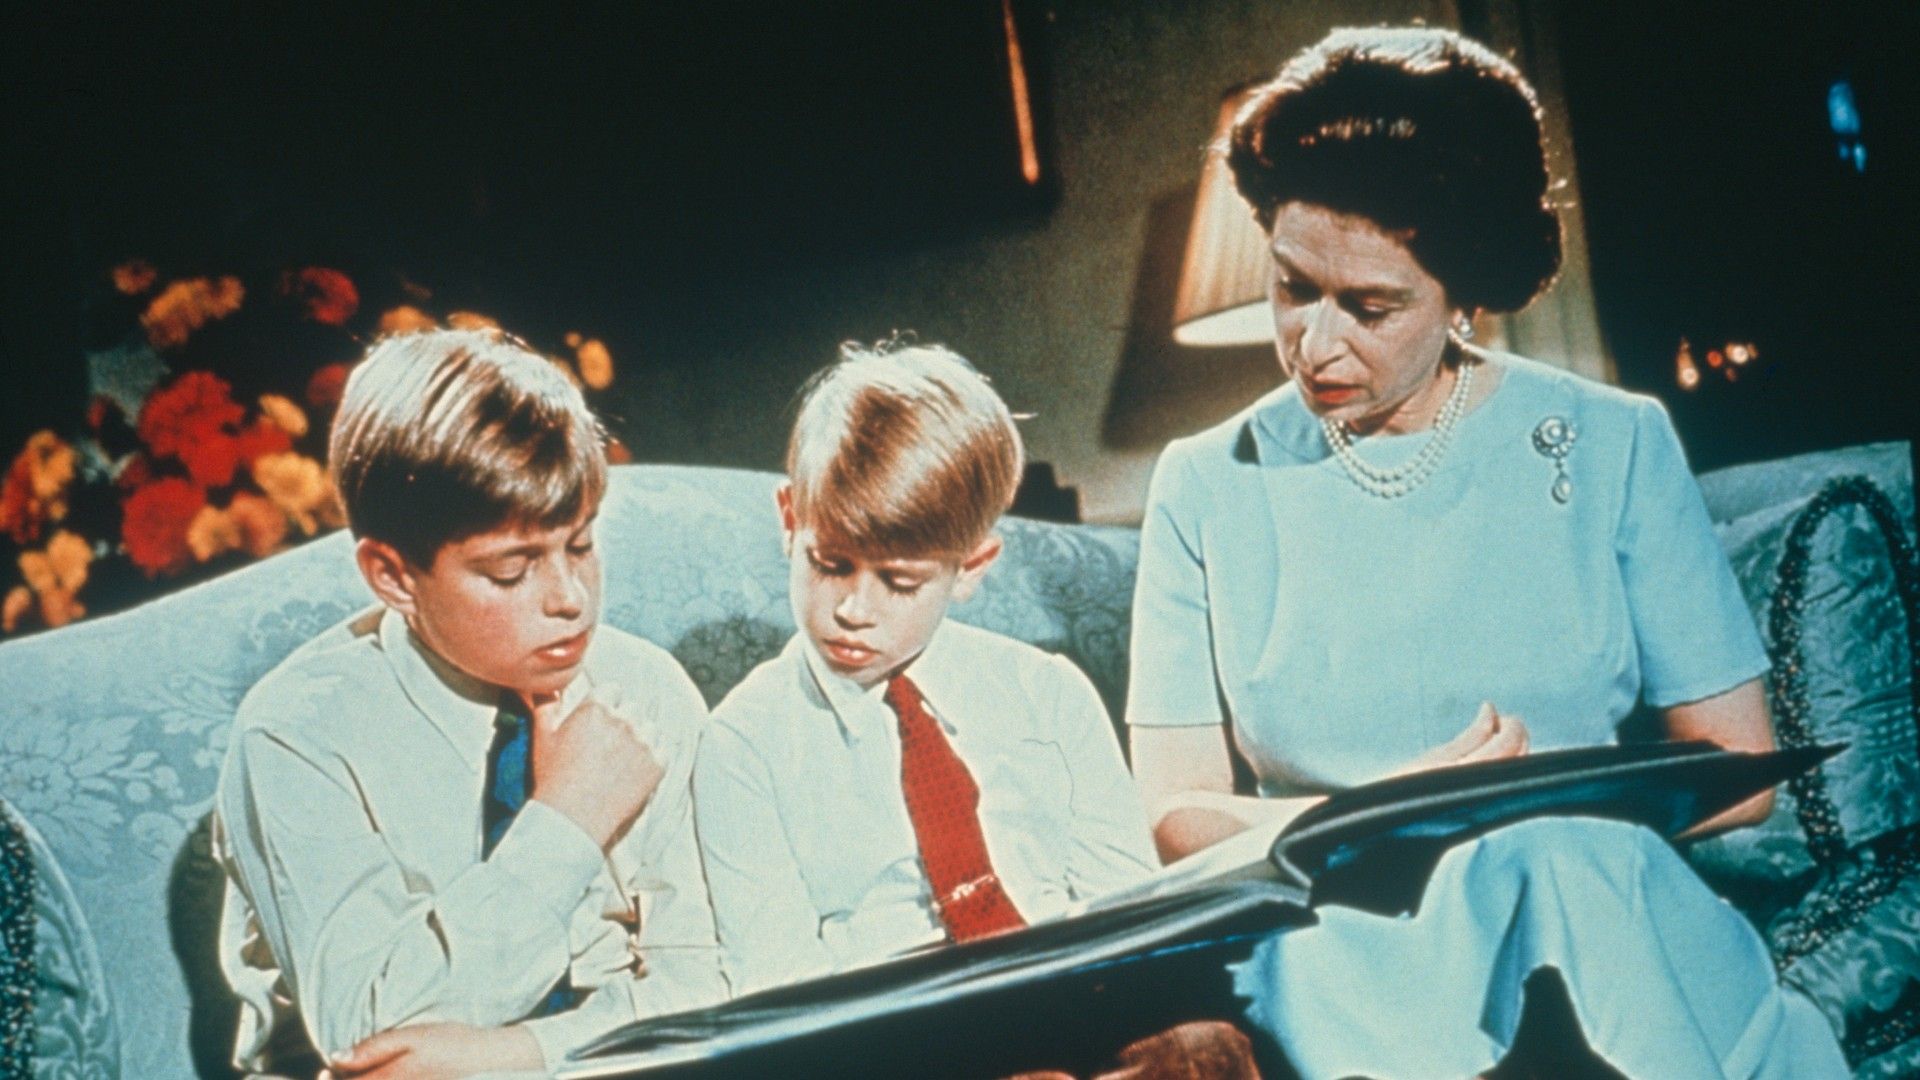 <p>                     This cosy glimpse into the special bond between the late Queen Elizabeth II and her two youngest sons, Prince Andrew and Prince Edward, was taken at Buckingham Palace during the 1971 Christmas Day television broadcast.                   </p>                                      <p>                     The sweet photo captures a moment of calm and unity that every family could relate to during the festivities.                   </p>